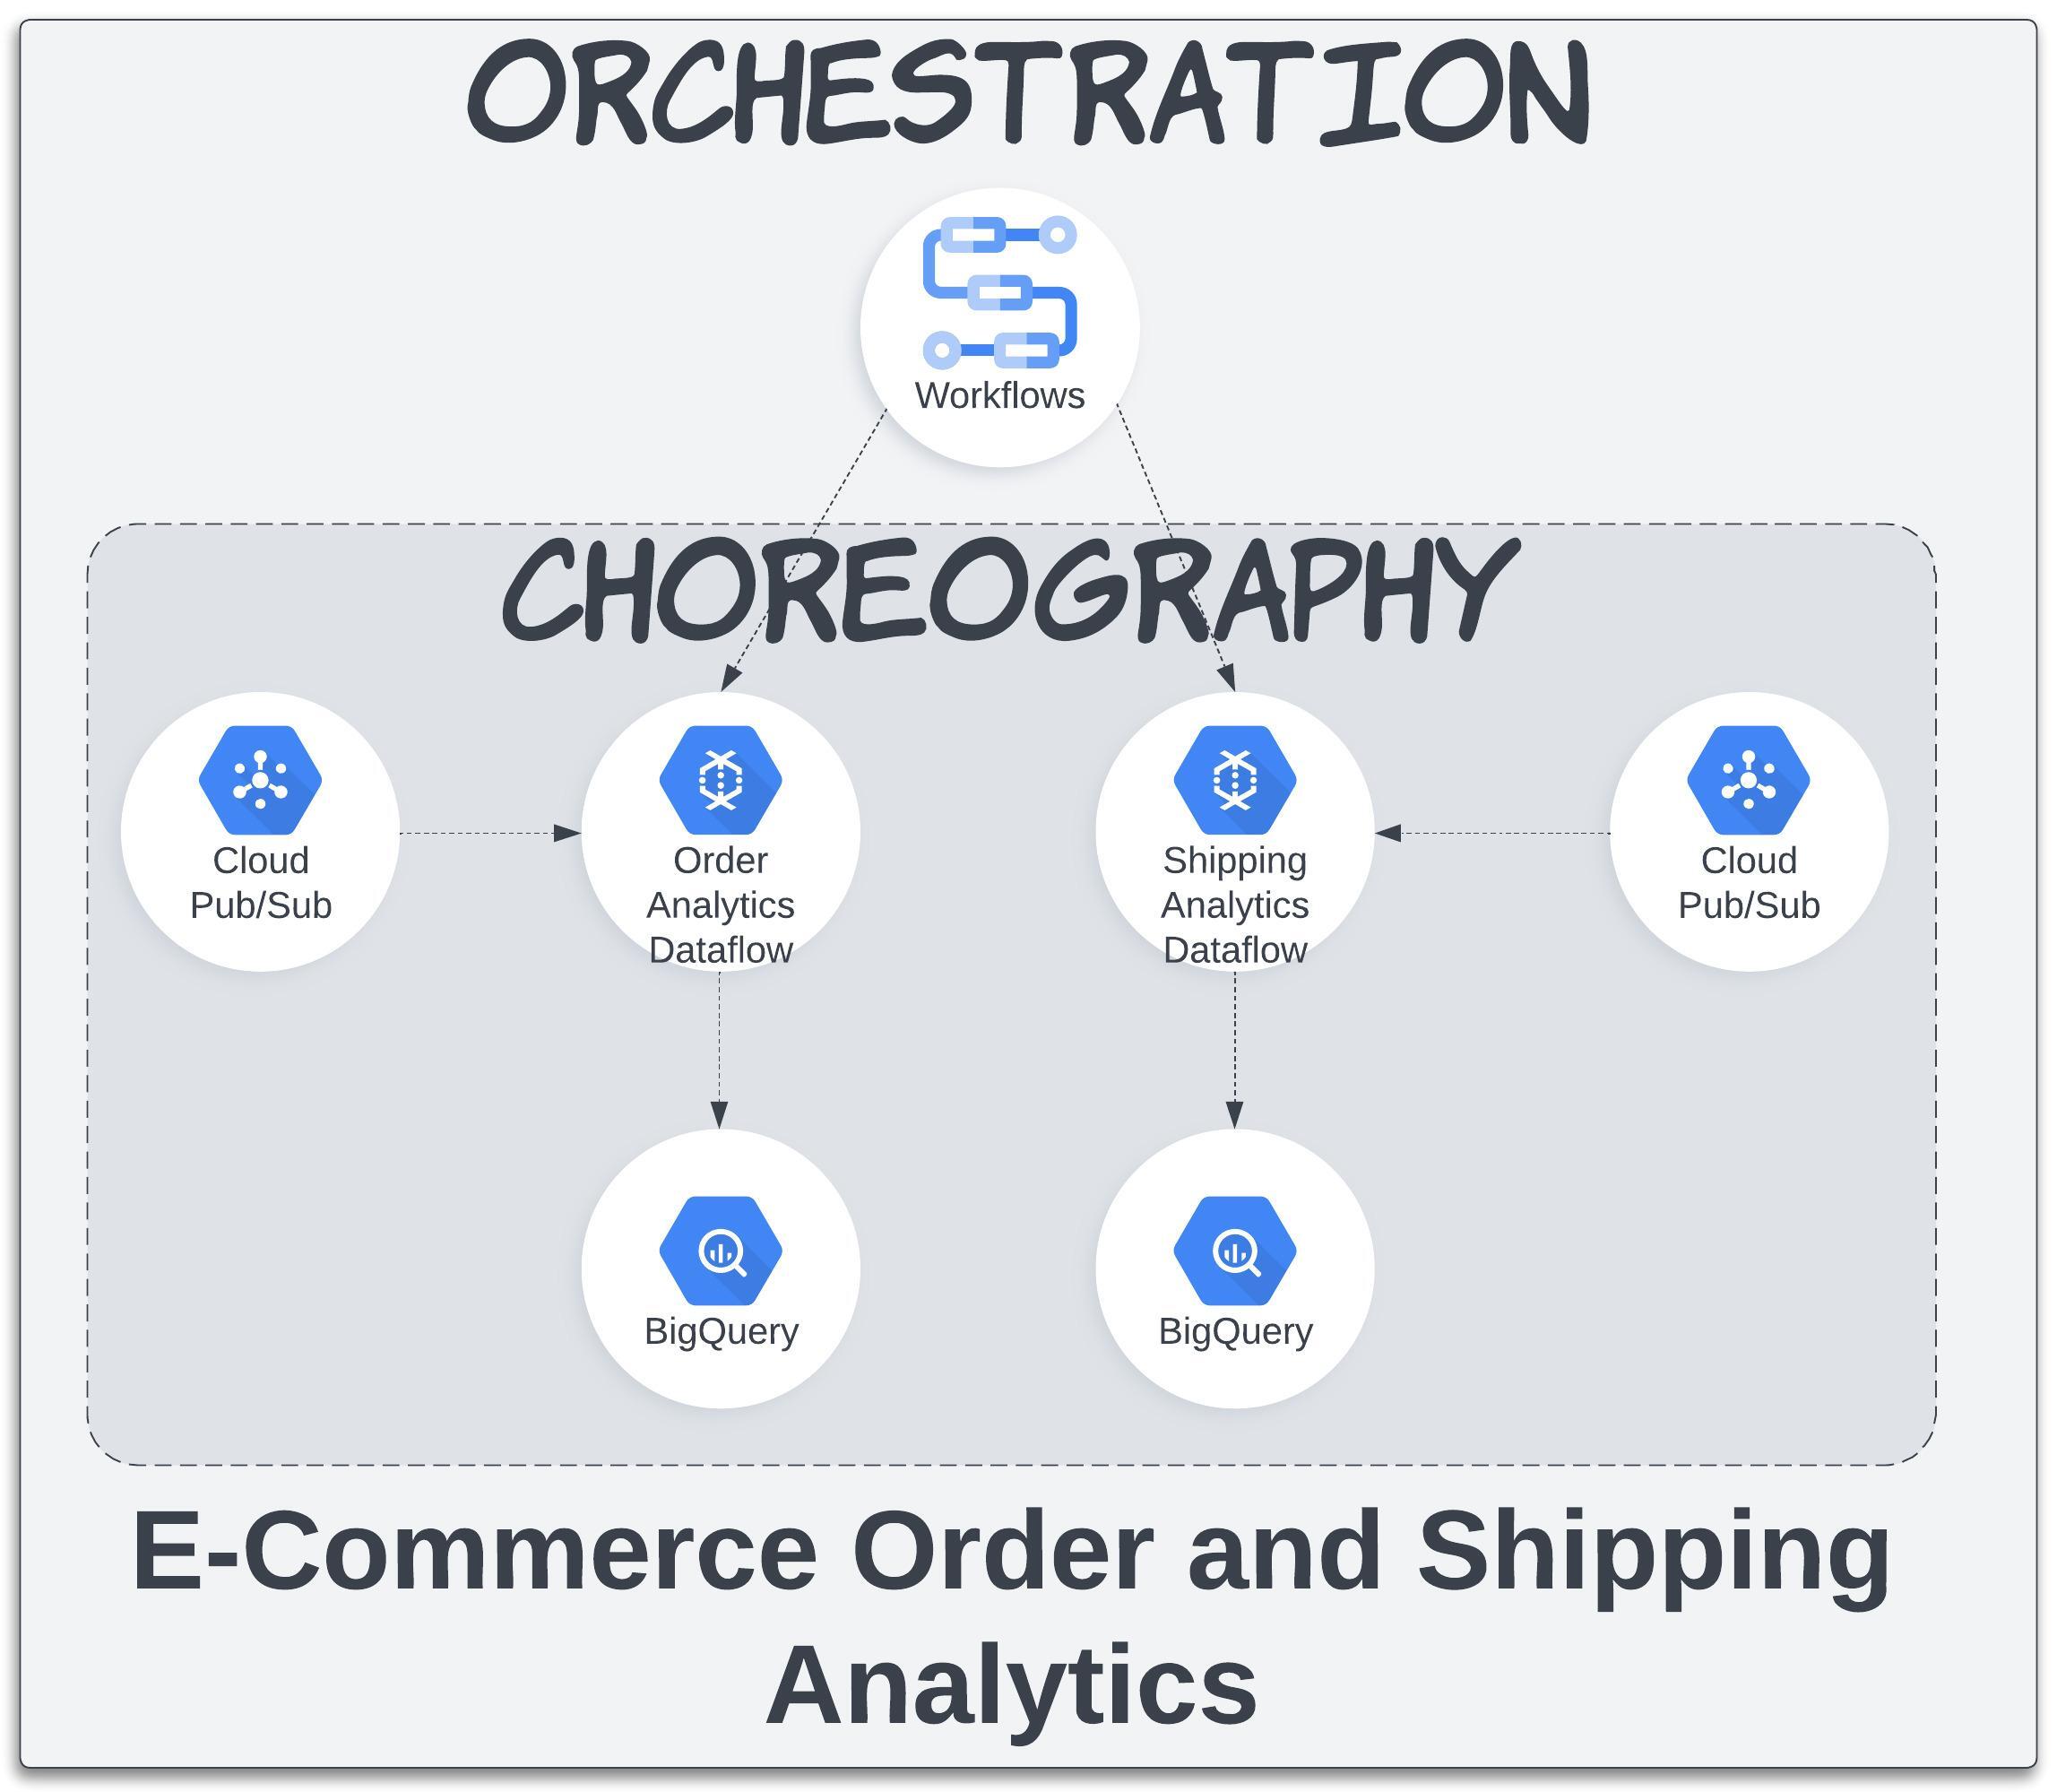 Orchestrating and Choreographing via Apache Beam and GCP Workflows